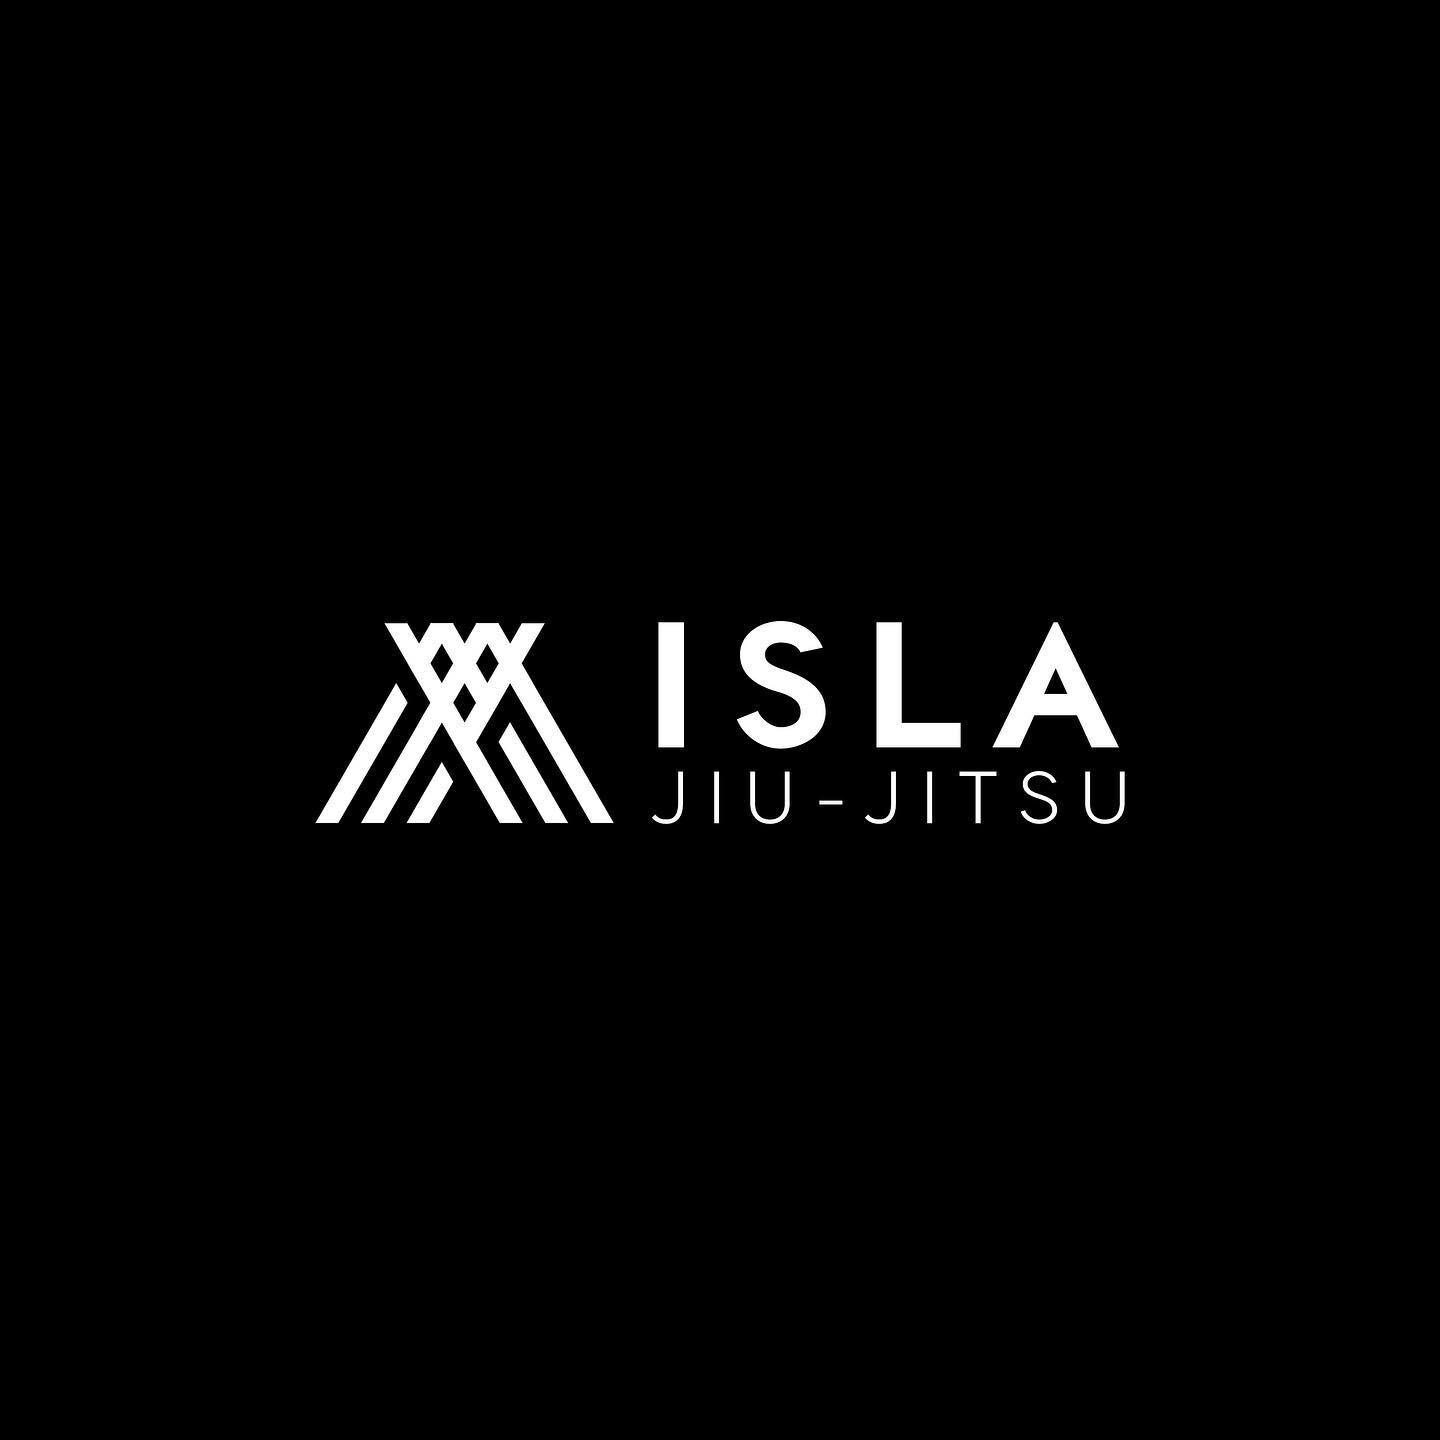 Here&rsquo;s a breakdown for our design concept and construction for the rebrand of Isla Jiu-Jitsu @islajiujitsu @jdm_isla 
This design embodies tradition, connection, and family. The Guafak mat is woven into culture and symbolizes legacy passed down